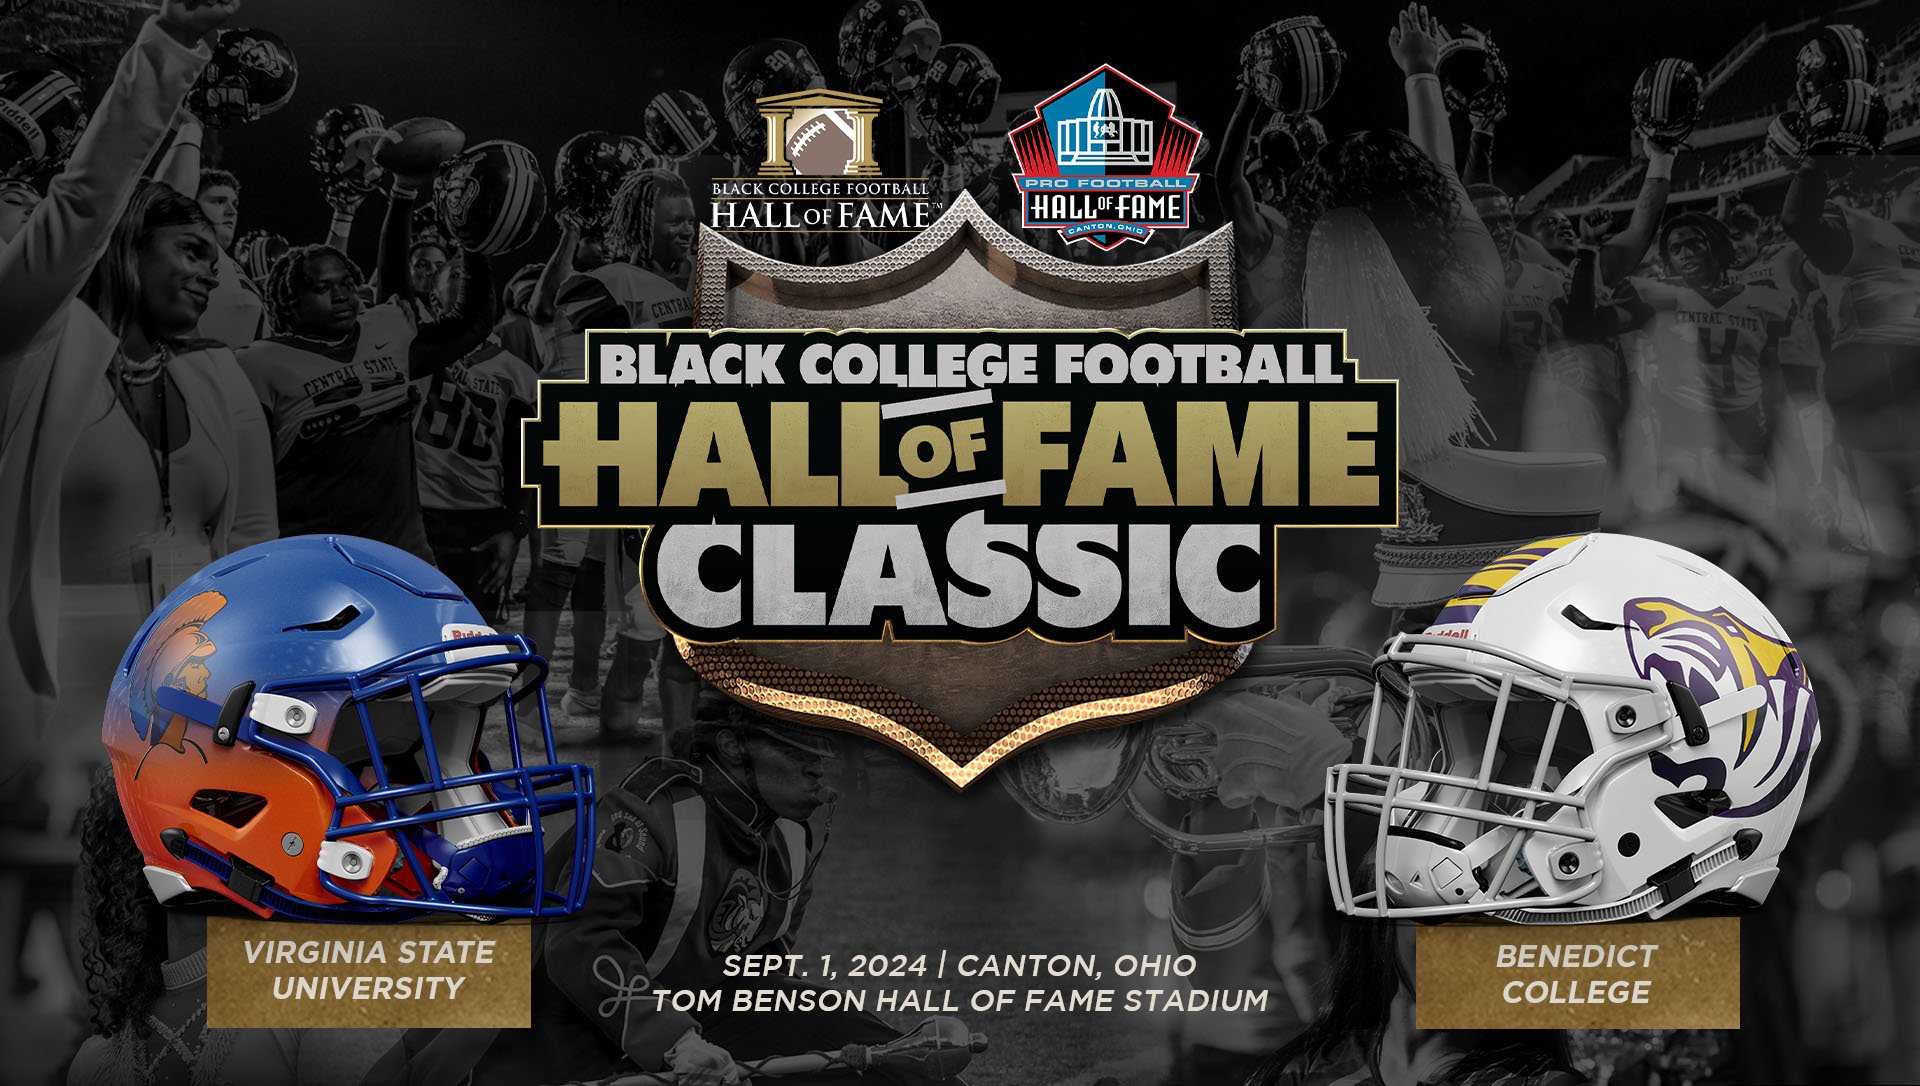 Virginia State University and Benedict College will face off in the 2024 Black College Football Hall of Fame Classic.